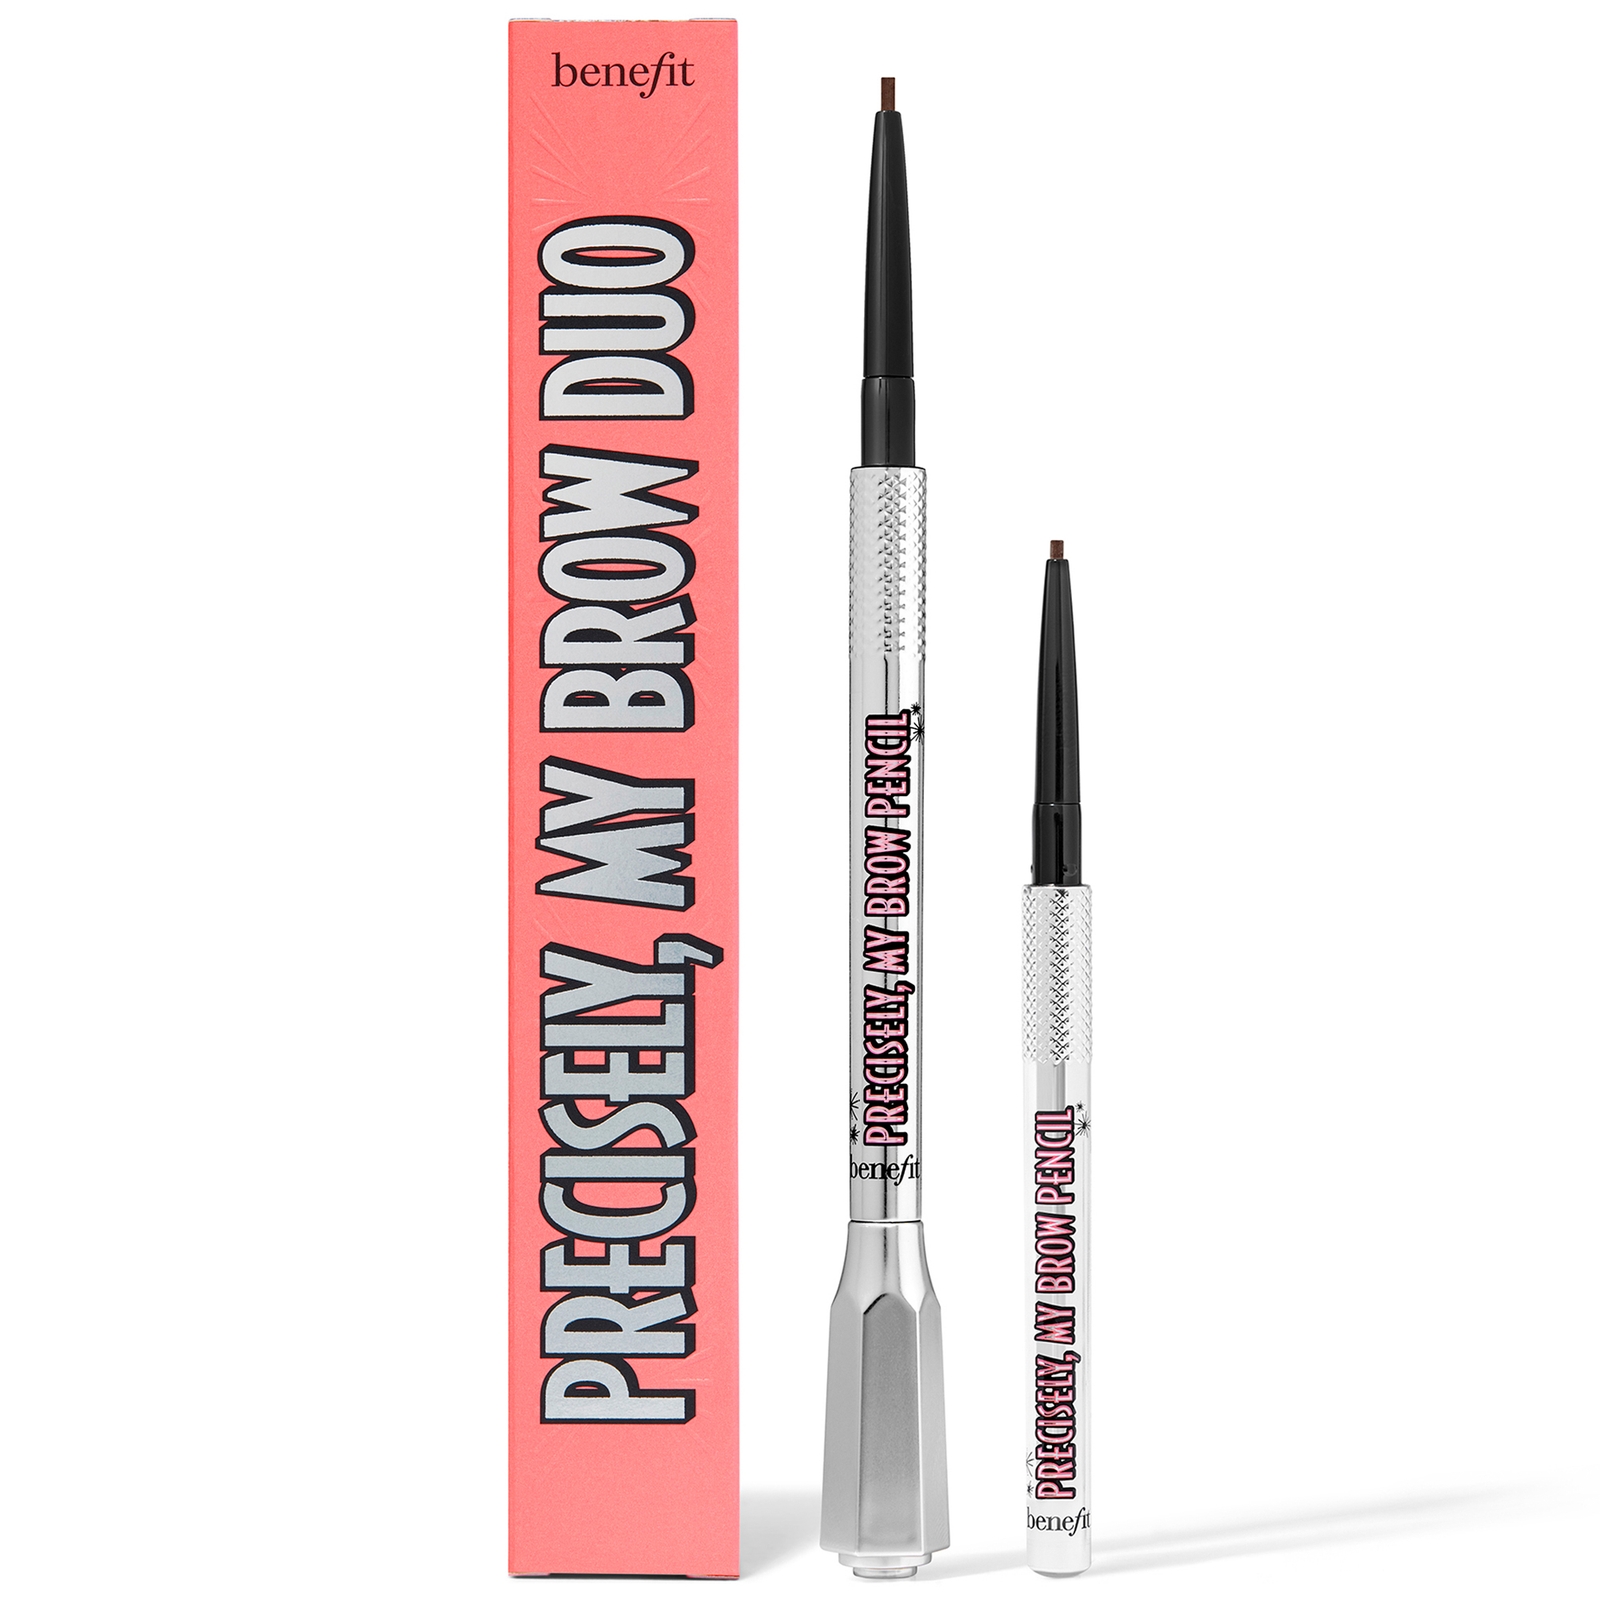 benefit The Precise Pair Precisely My Brow Pencil Duo Set (Various Shades) - 5 Warm Black-Brown